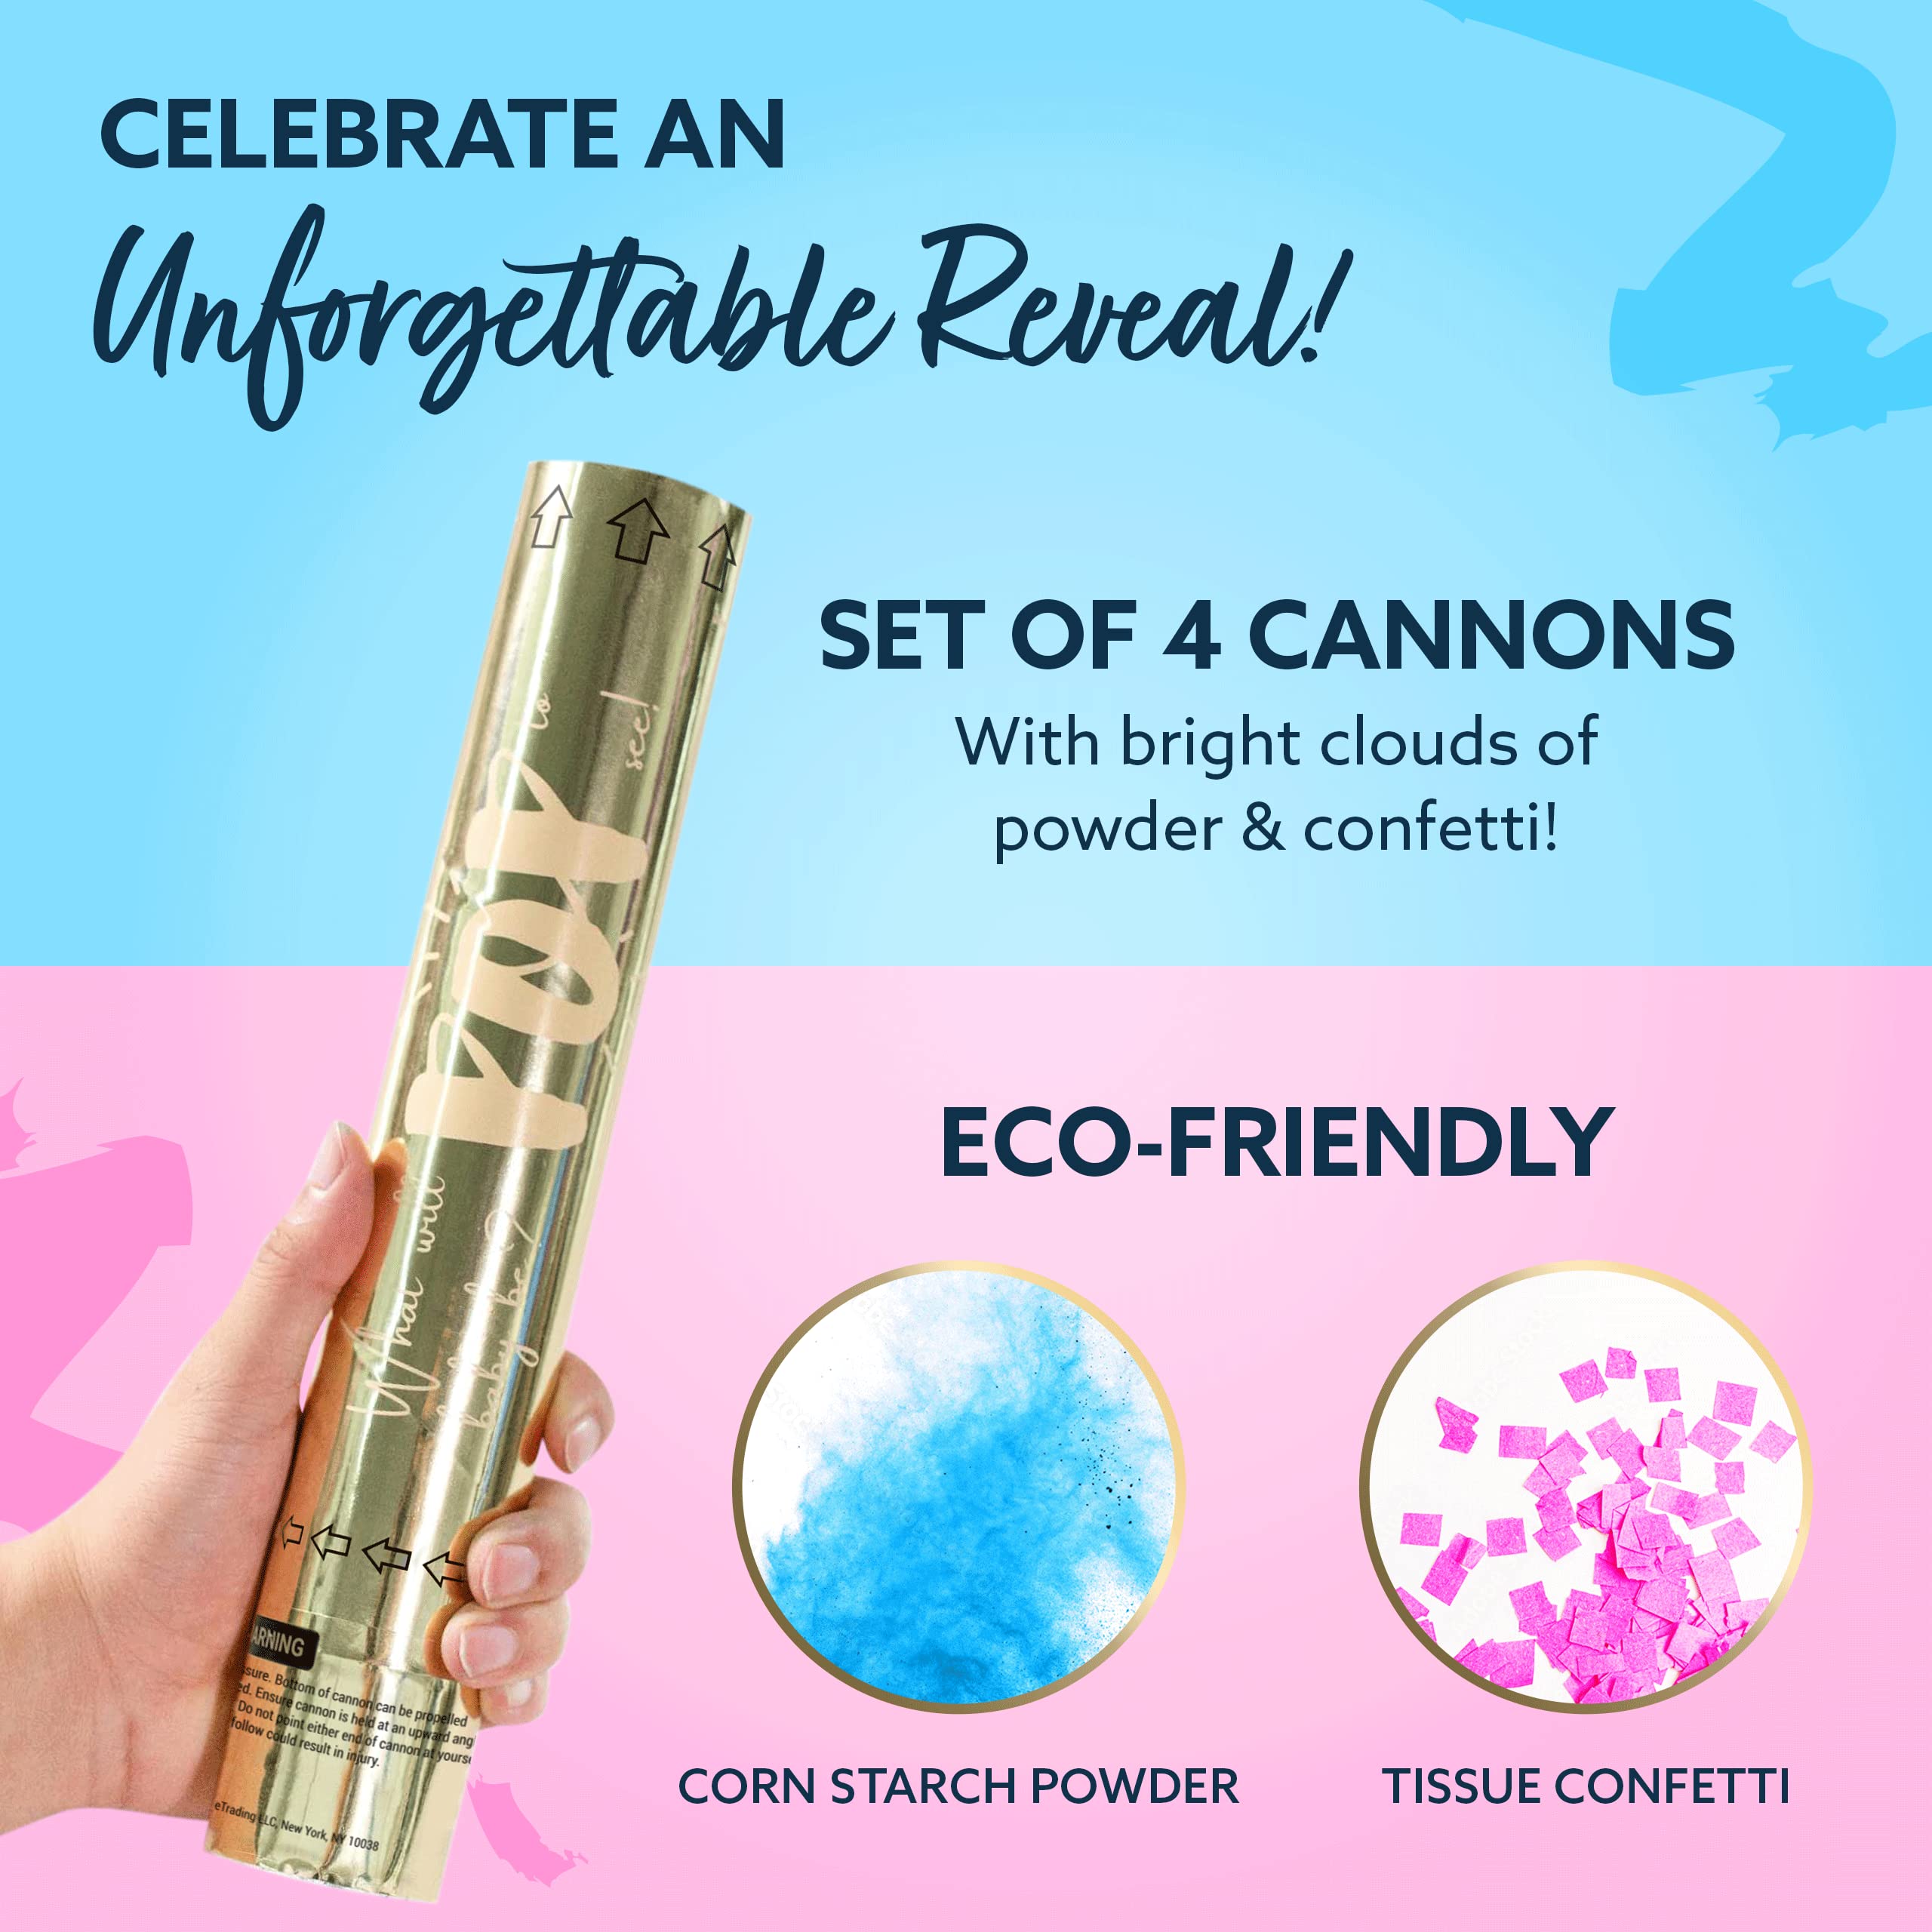 Revealations Gender Reveal Confetti Powder Cannon - Set of 4 Mixed (2 Blue 2 Pink) Party Supplies - 100% Biodegradable Tissue Safe Powder Smoke